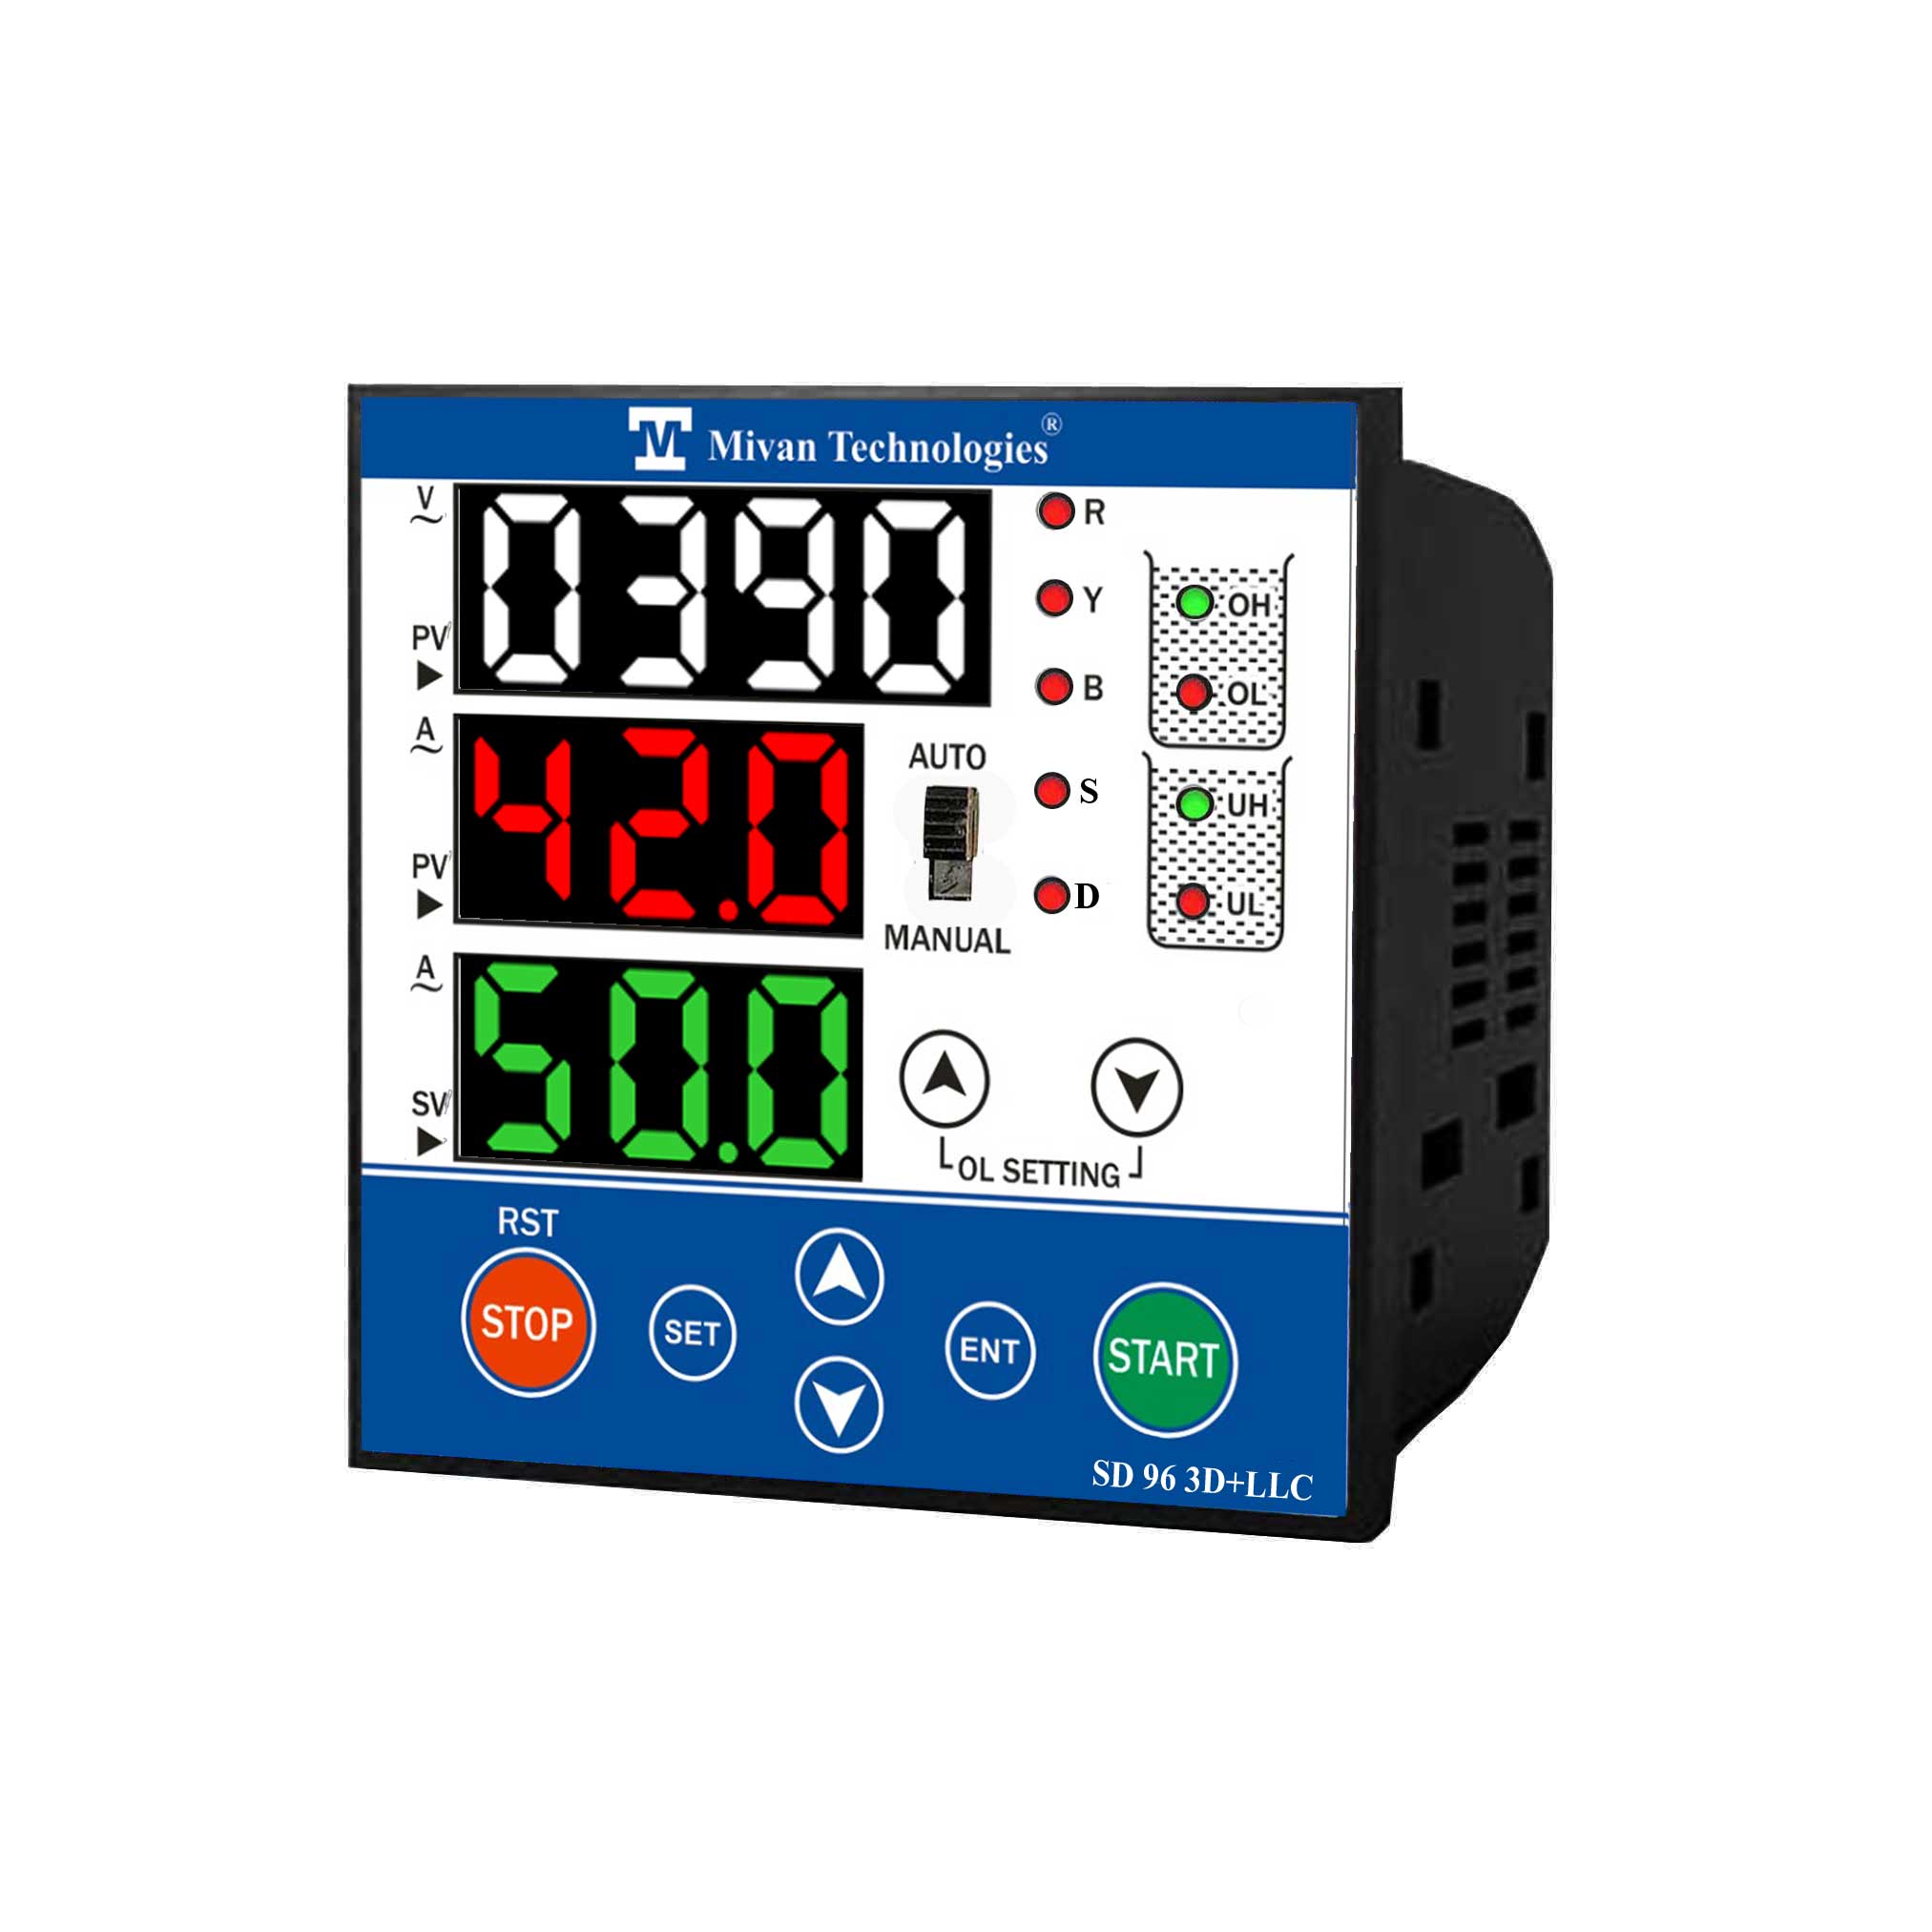 SD 3DW 3 display instrument with water level controller to design any hp Star Delta starter to provide HV LV OL Dry protection with timer spp auto switch